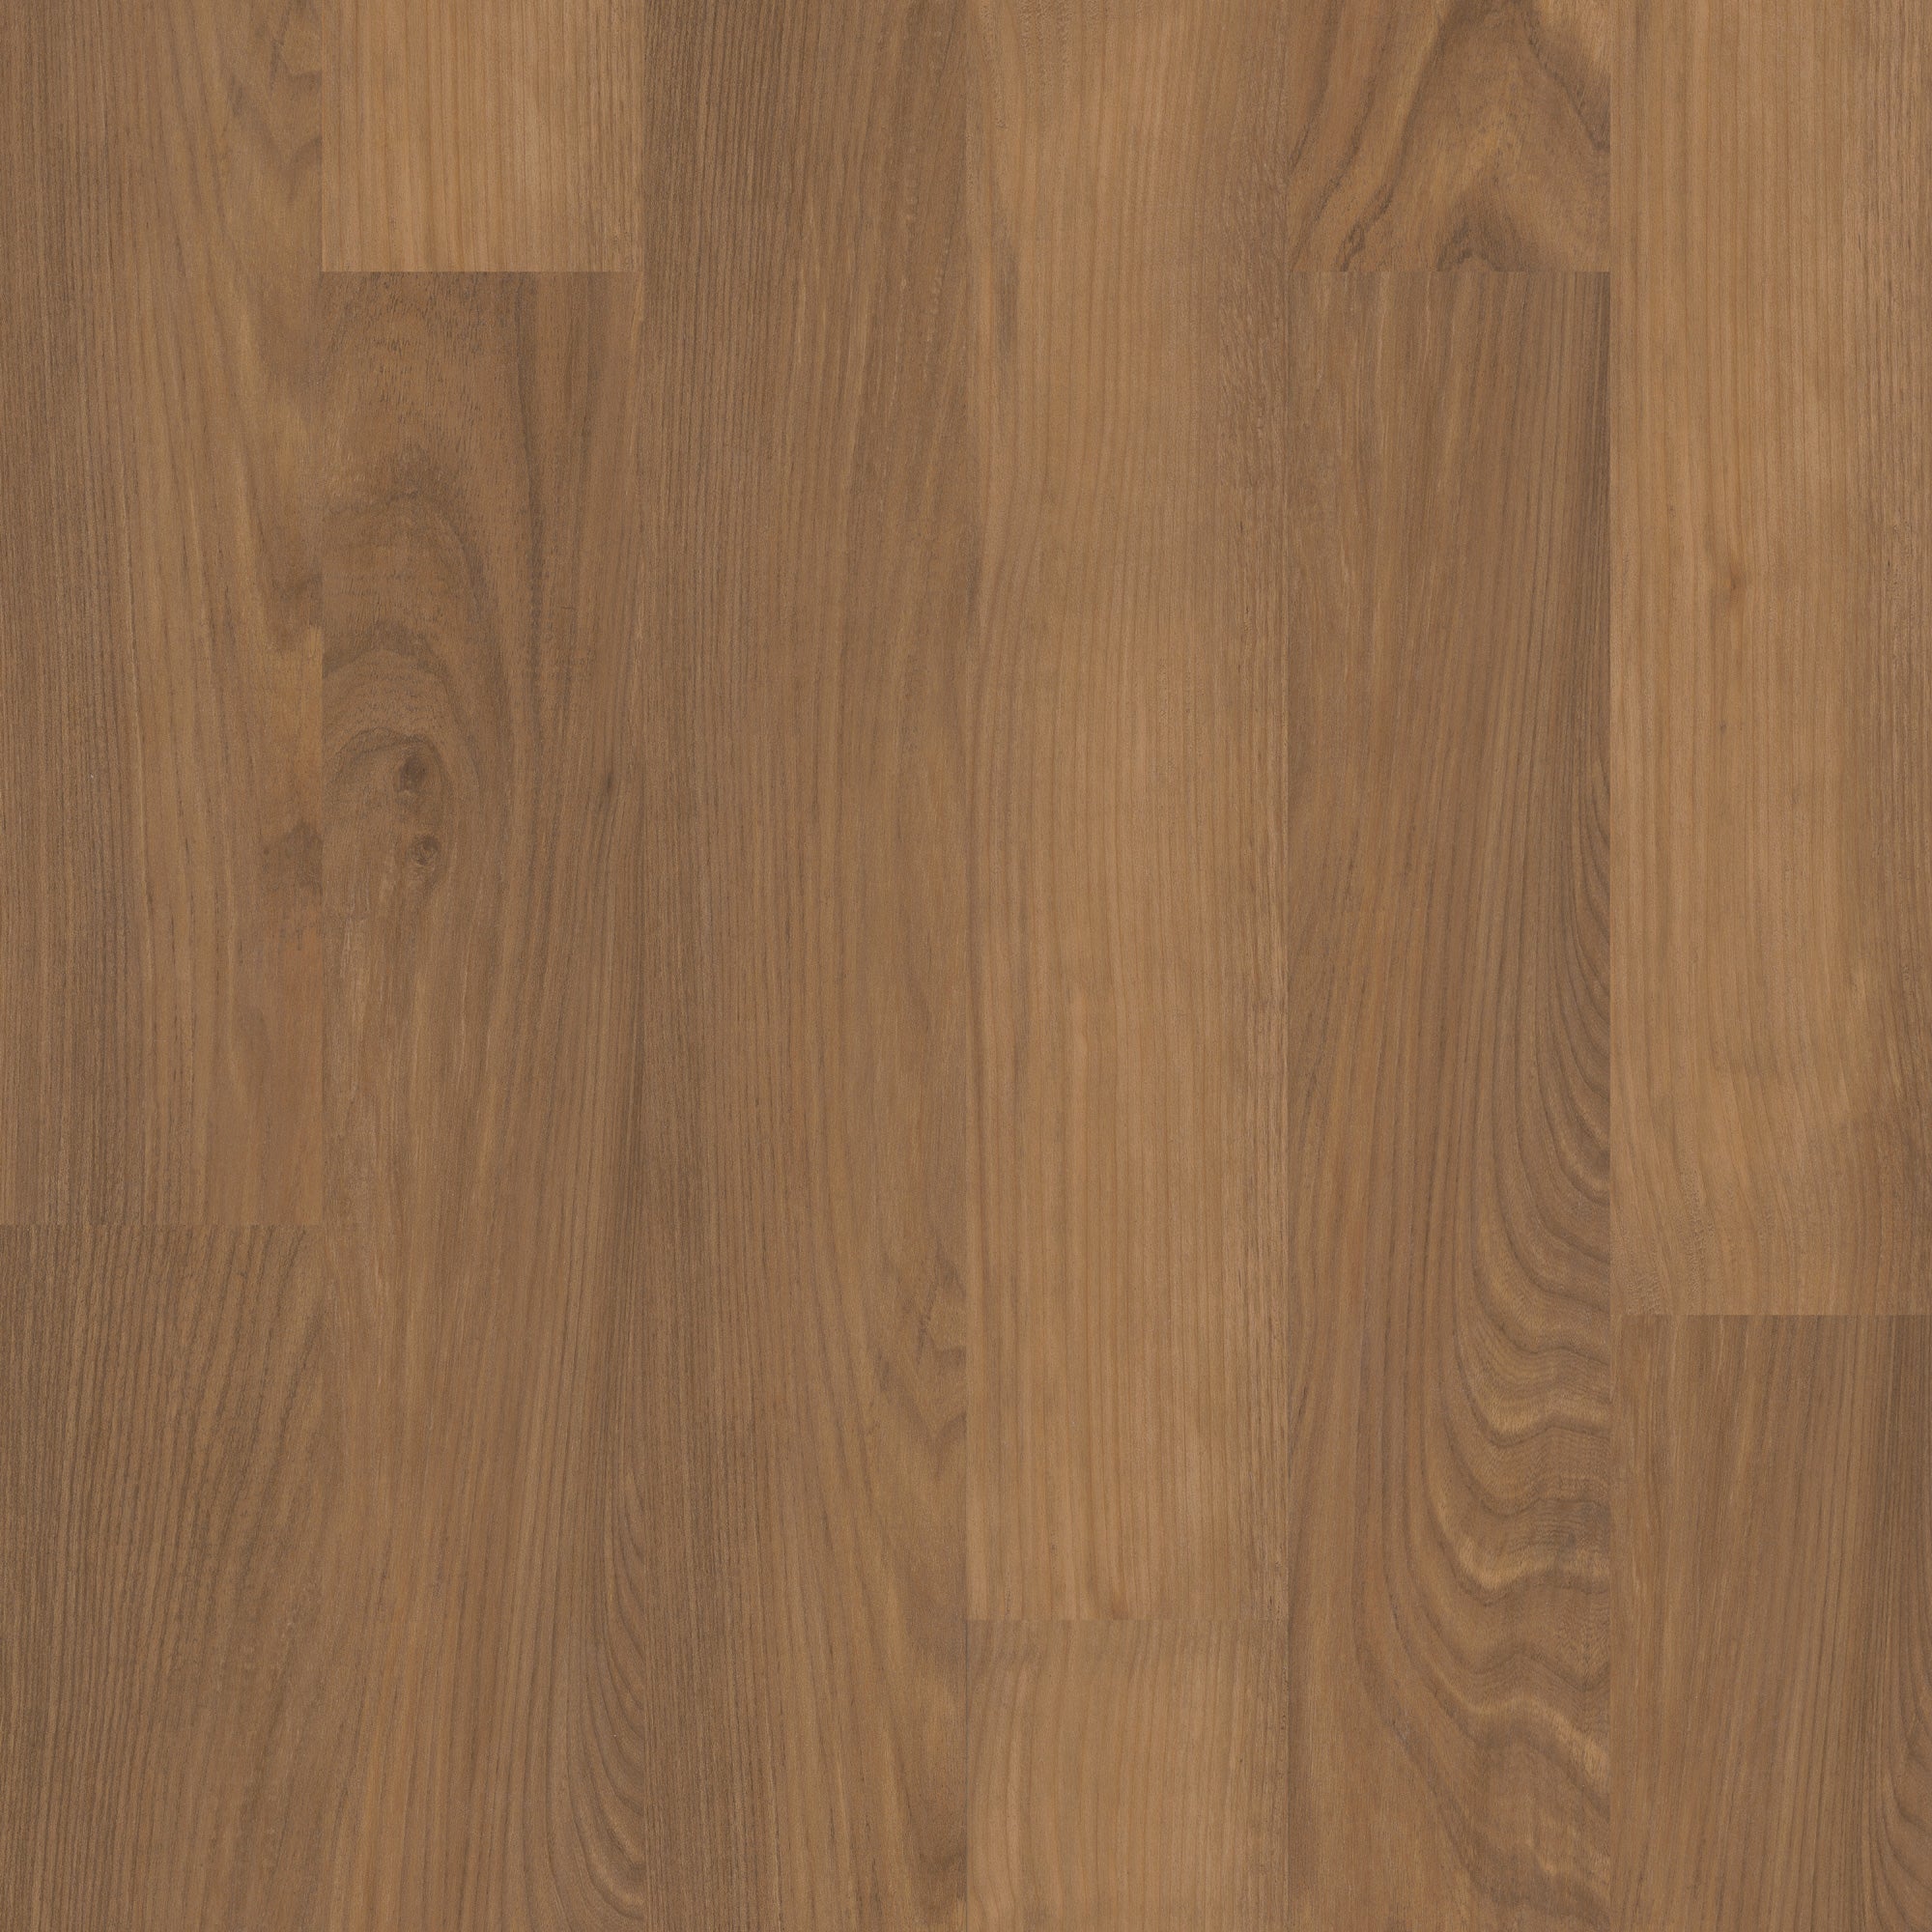 TRUCOR by Dixie Home - 5 Series - Russet Oak